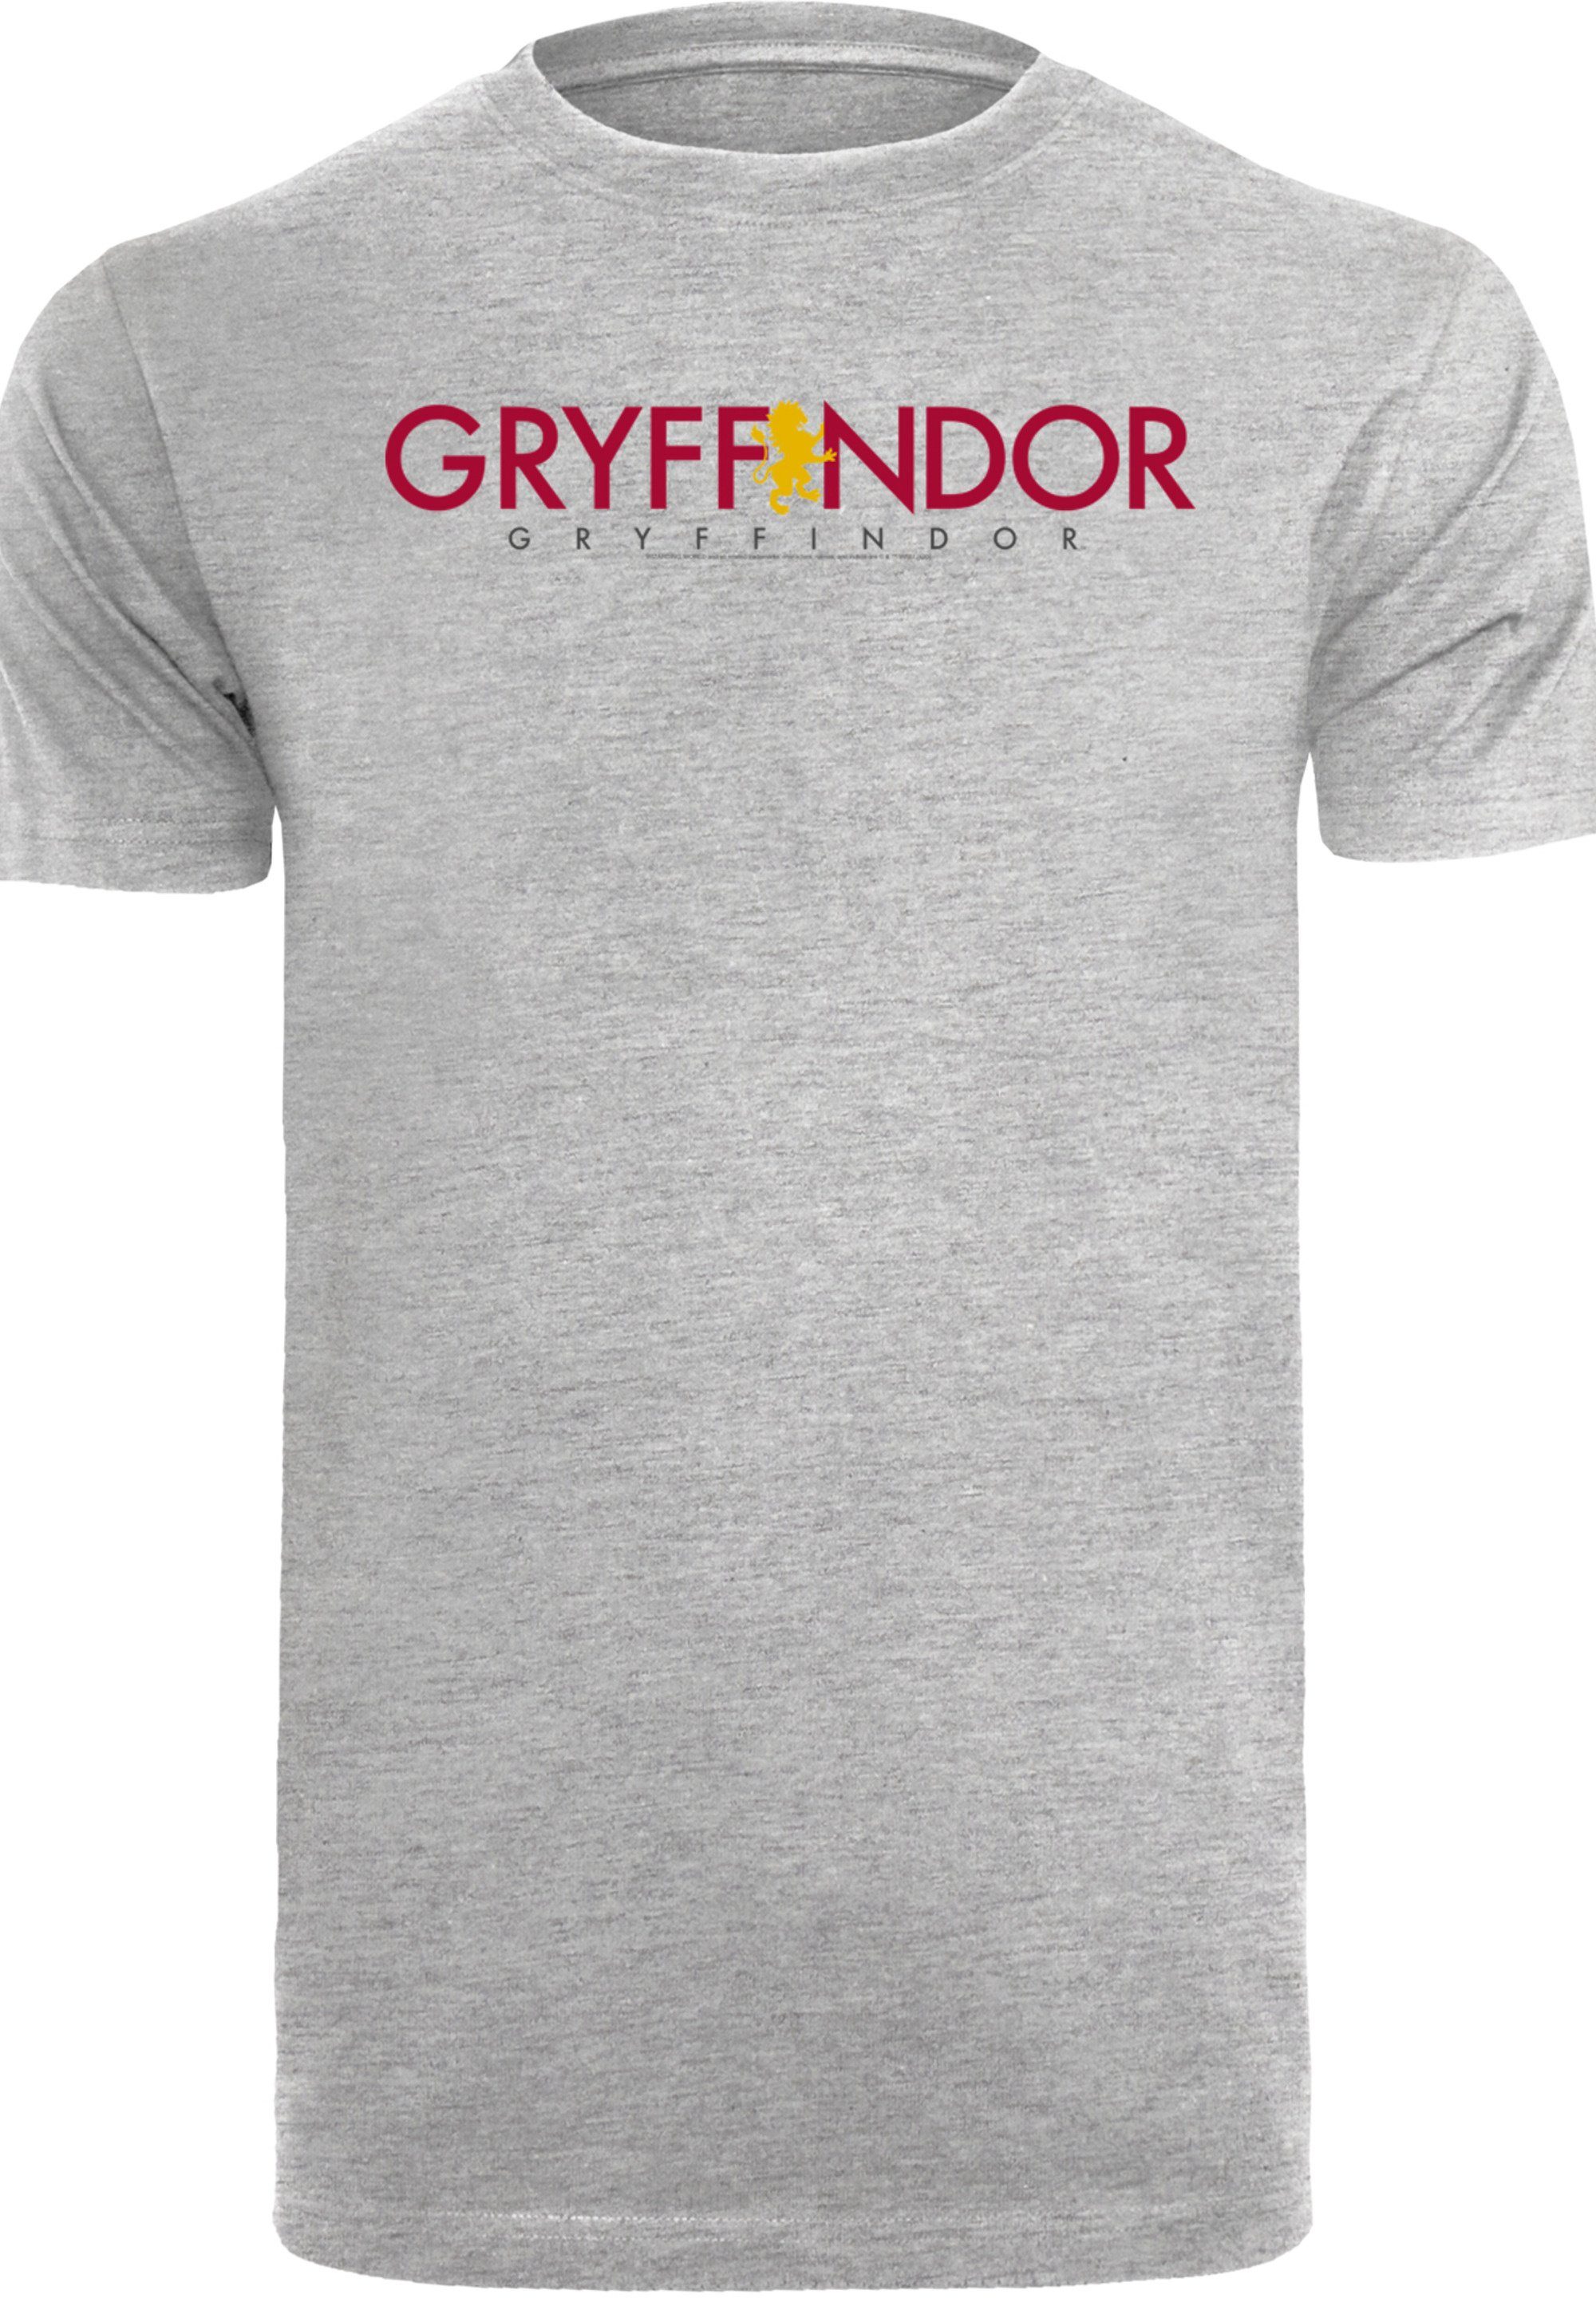 F4NT4STIC T-Shirt heather Potter Text Gryffindor grey Print Harry